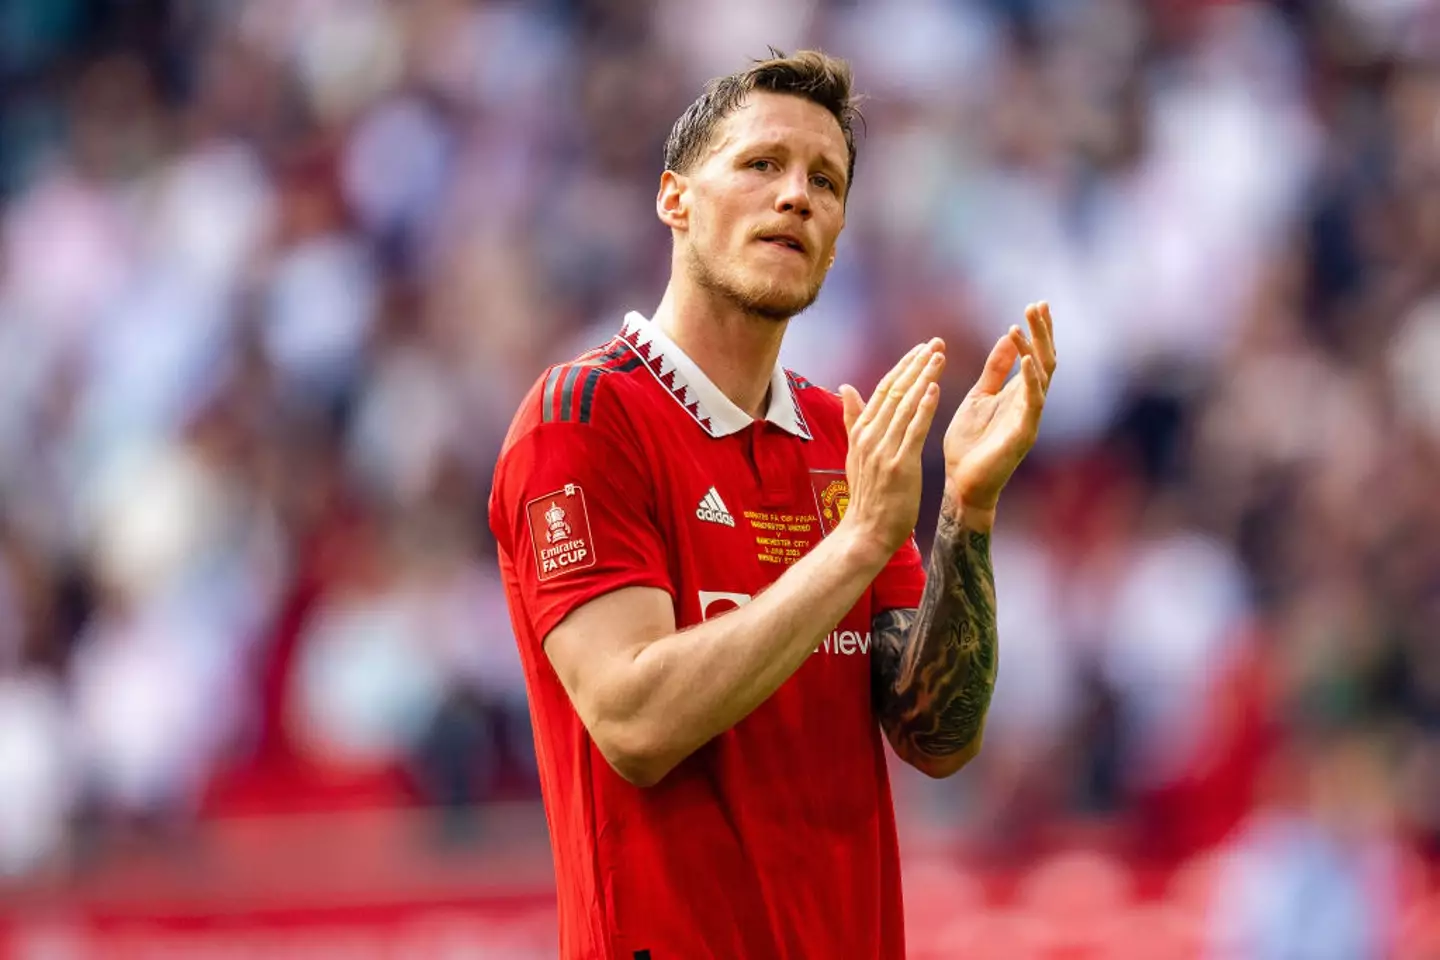 Wout Weghorst left Manchester United at the end of the 2022/23 season. (Image: Getty)